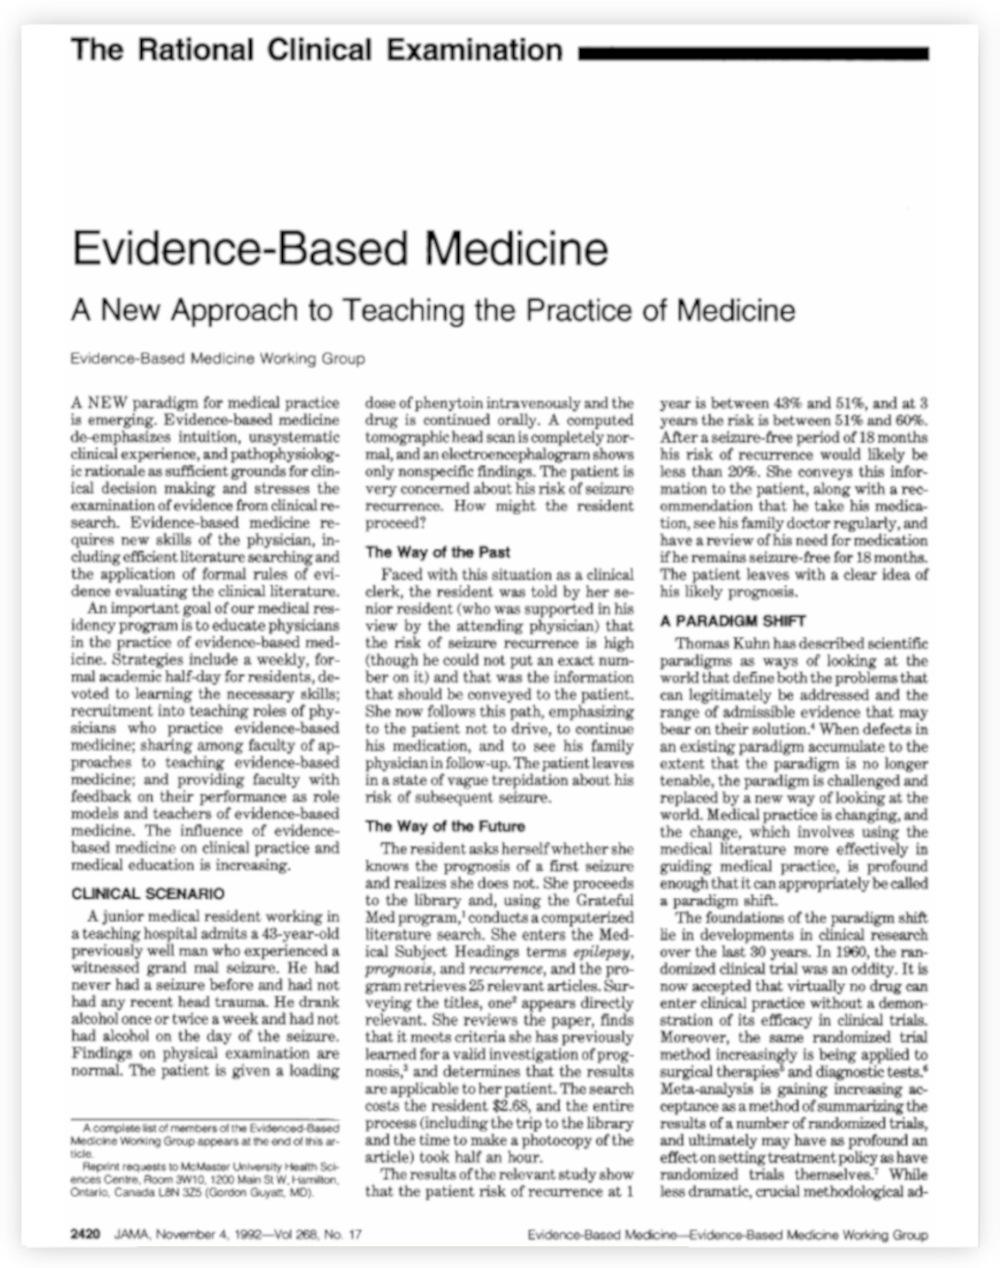 Are Evidence-Based Medicine and Public Health Incompatible?